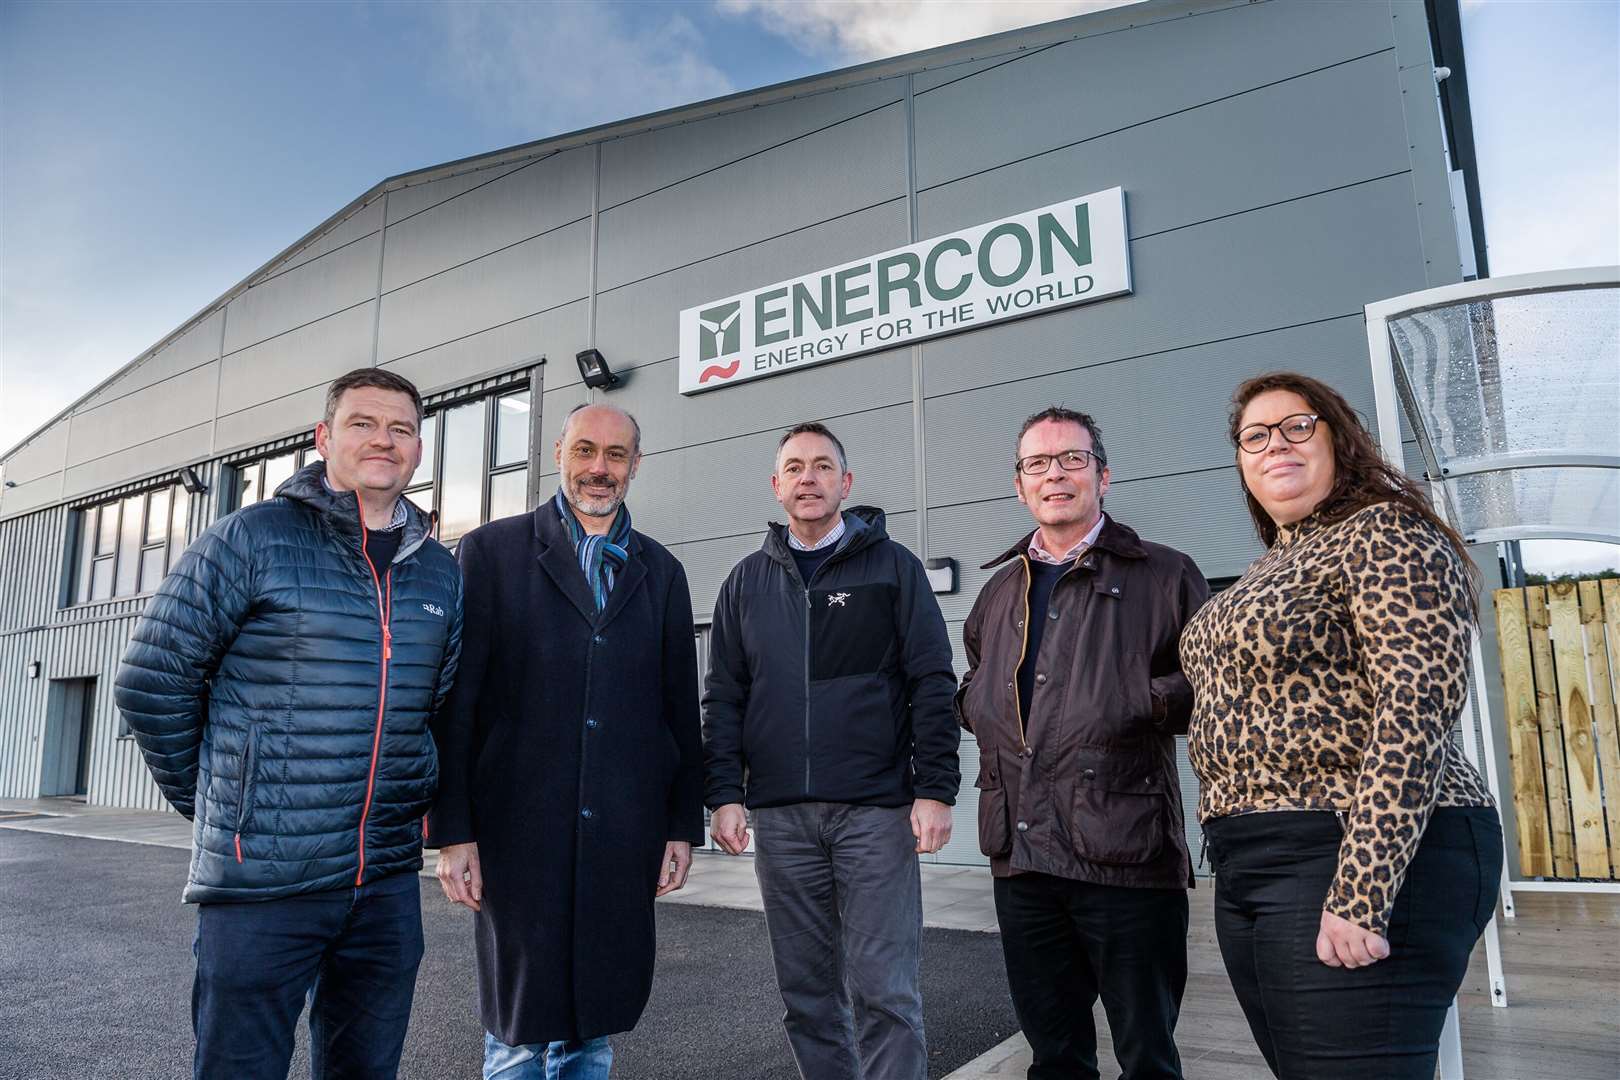 From left, Brian Innes, of IBI Joiners Ltd, Julian Martin, the managing director of ENERCON Services UK Ltd, Willie Gray, the managing director of Ark Estates, Inglis Lyon, the managing director of HIAL and Kelly Horn, business support manager with ENERCON Services UK Ltd.